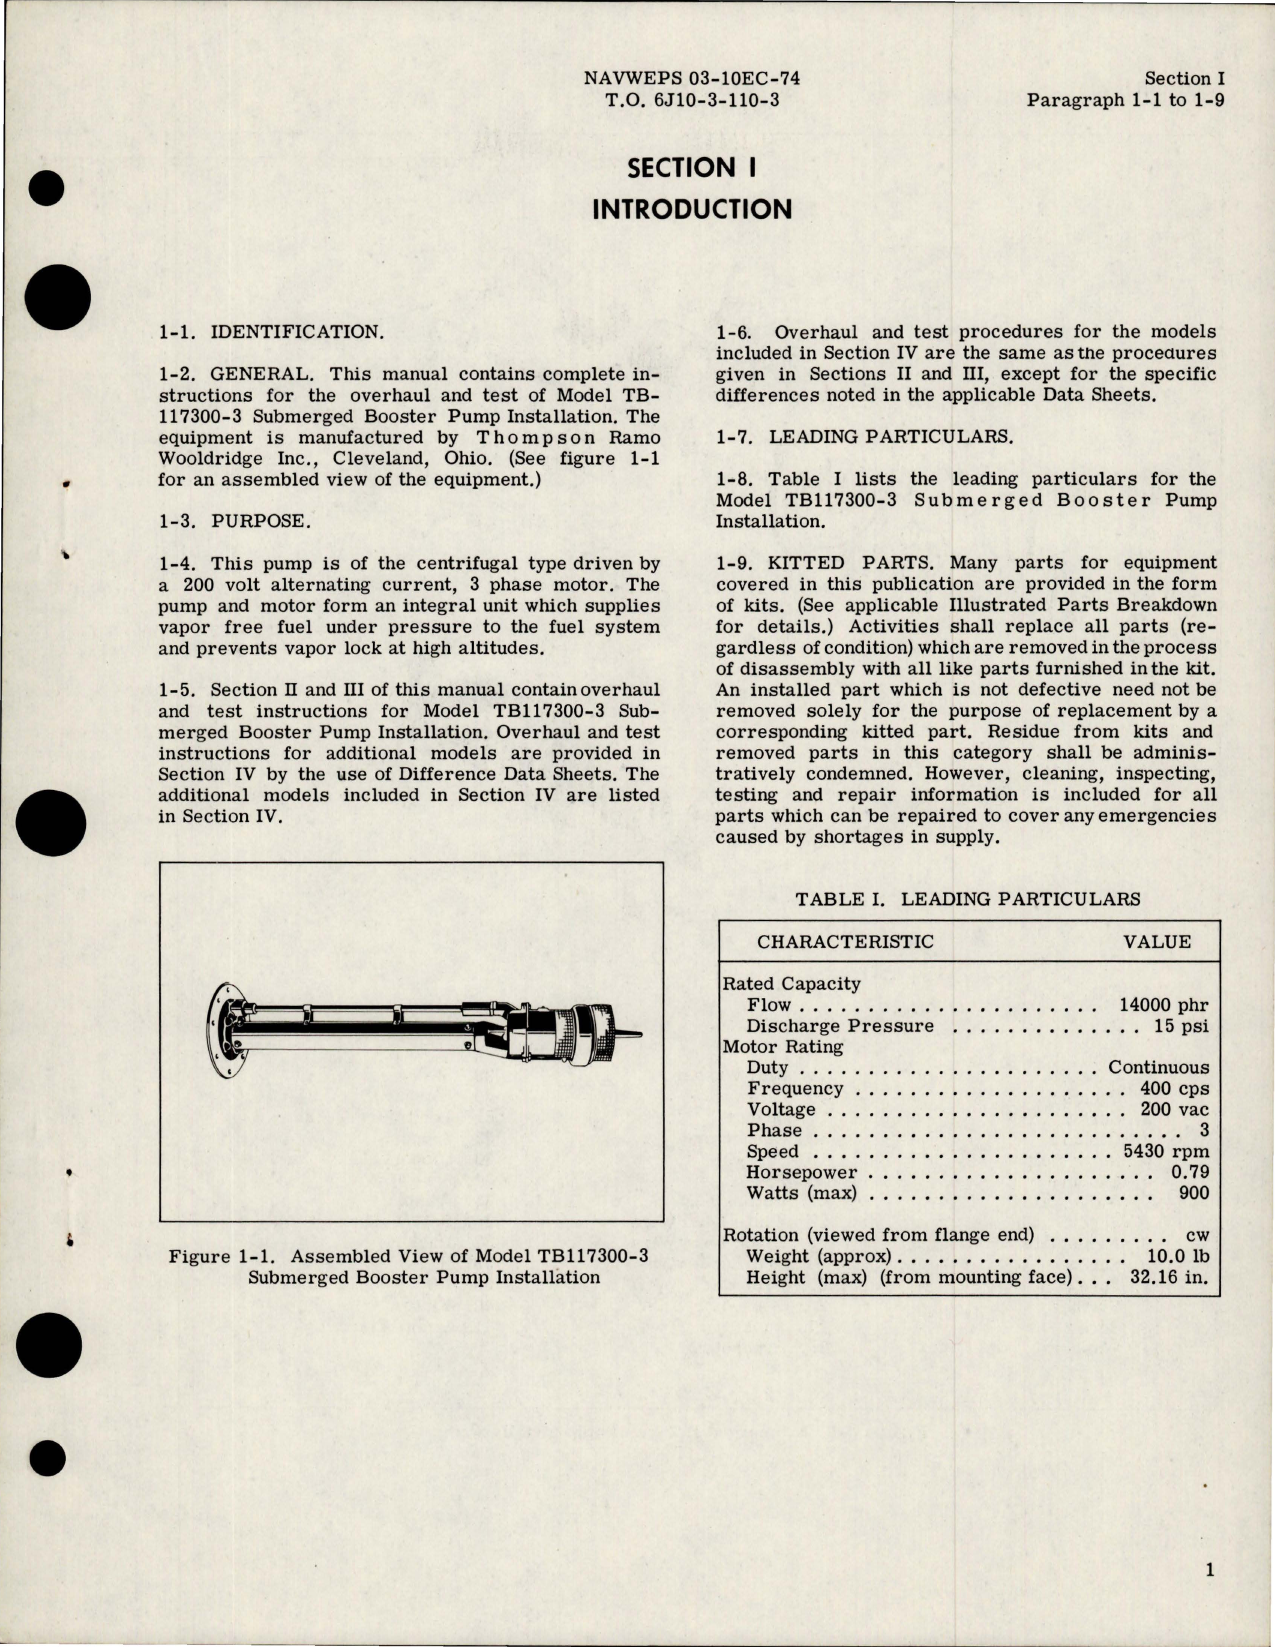 Sample page 7 from AirCorps Library document: Overhaul Instructions for Submerged Booster Pump - Models TB117300-3, TB117300-5, and 245200-1 